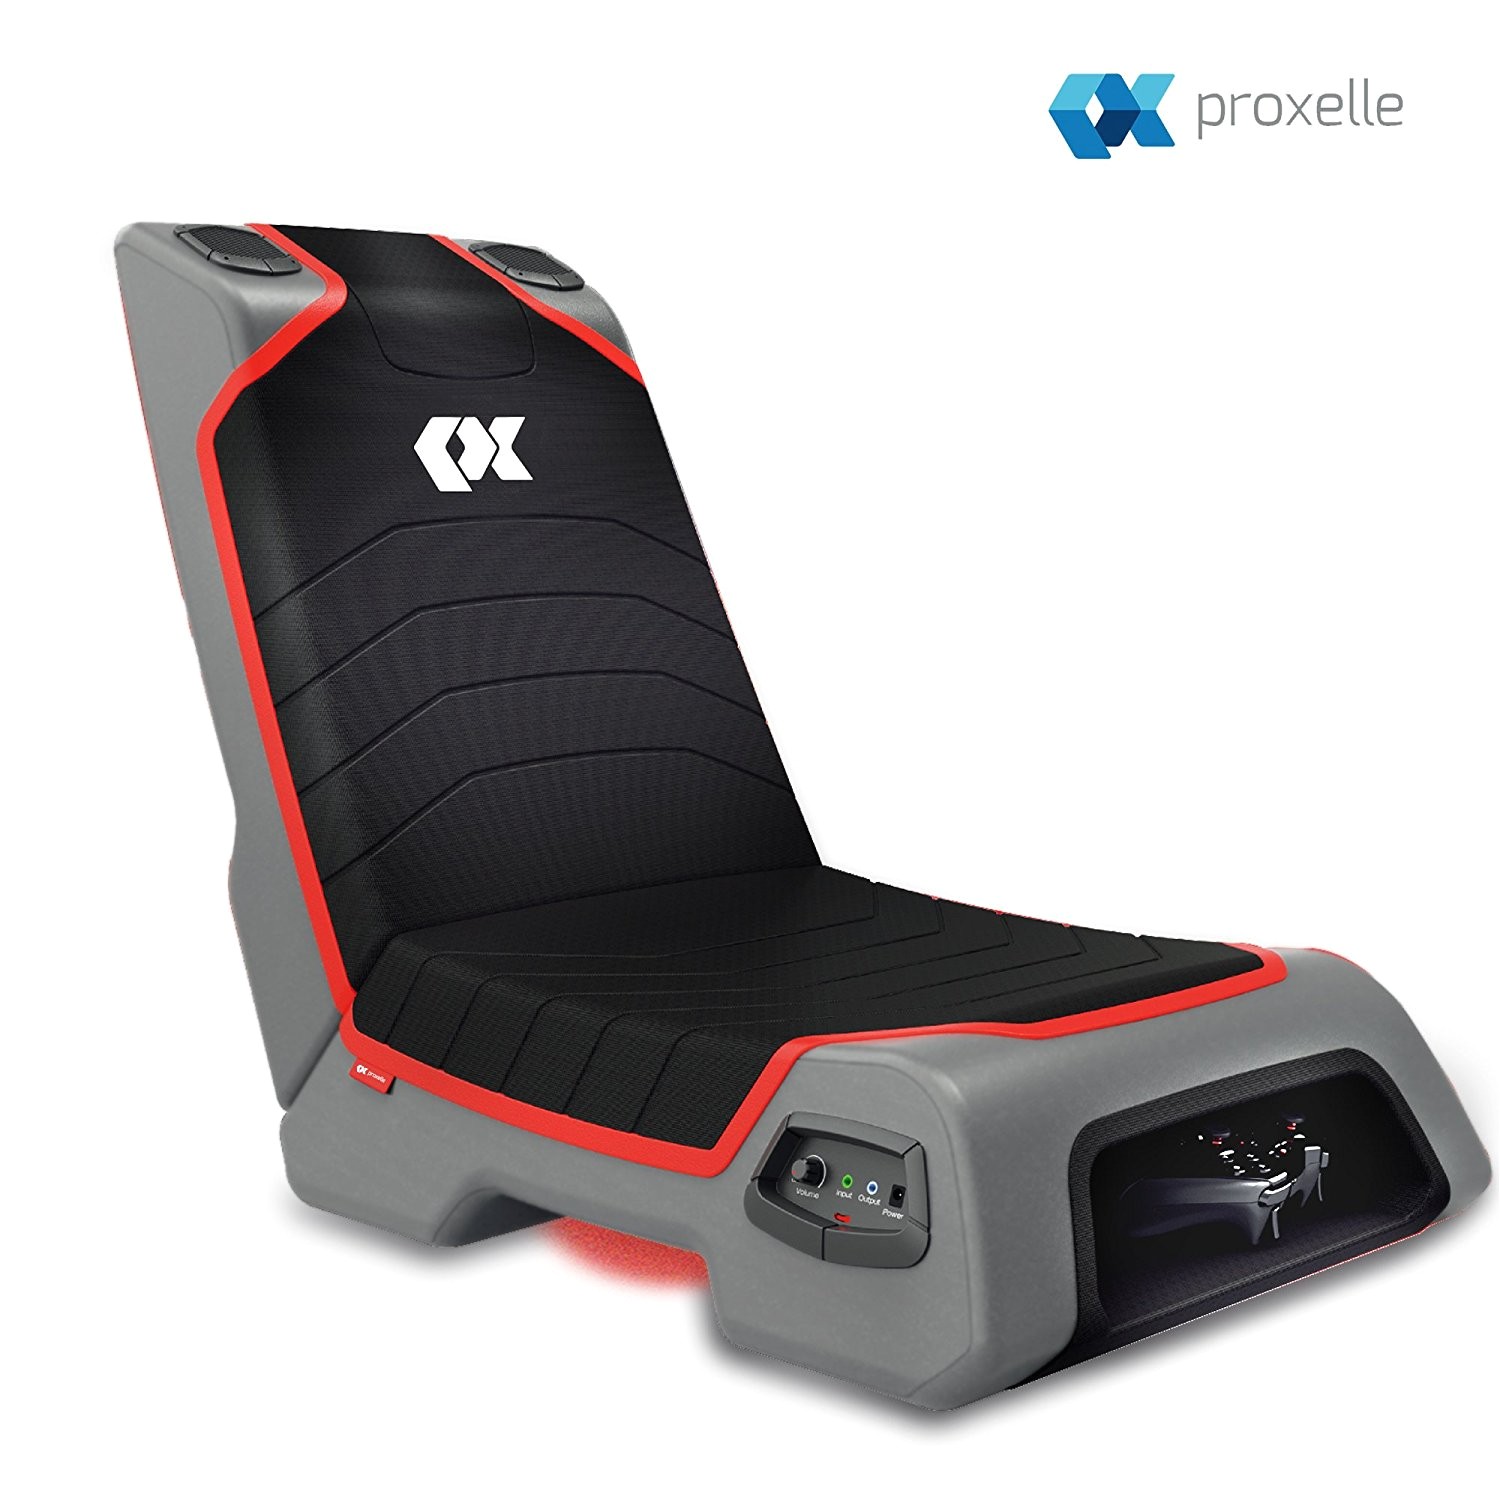 proxelle video game chair dual 3w speakers ps4 ps3 ps2 xbox one xbox 360 nintendo wii connect through tv dvd ipod iphone android and mp3 walmart com